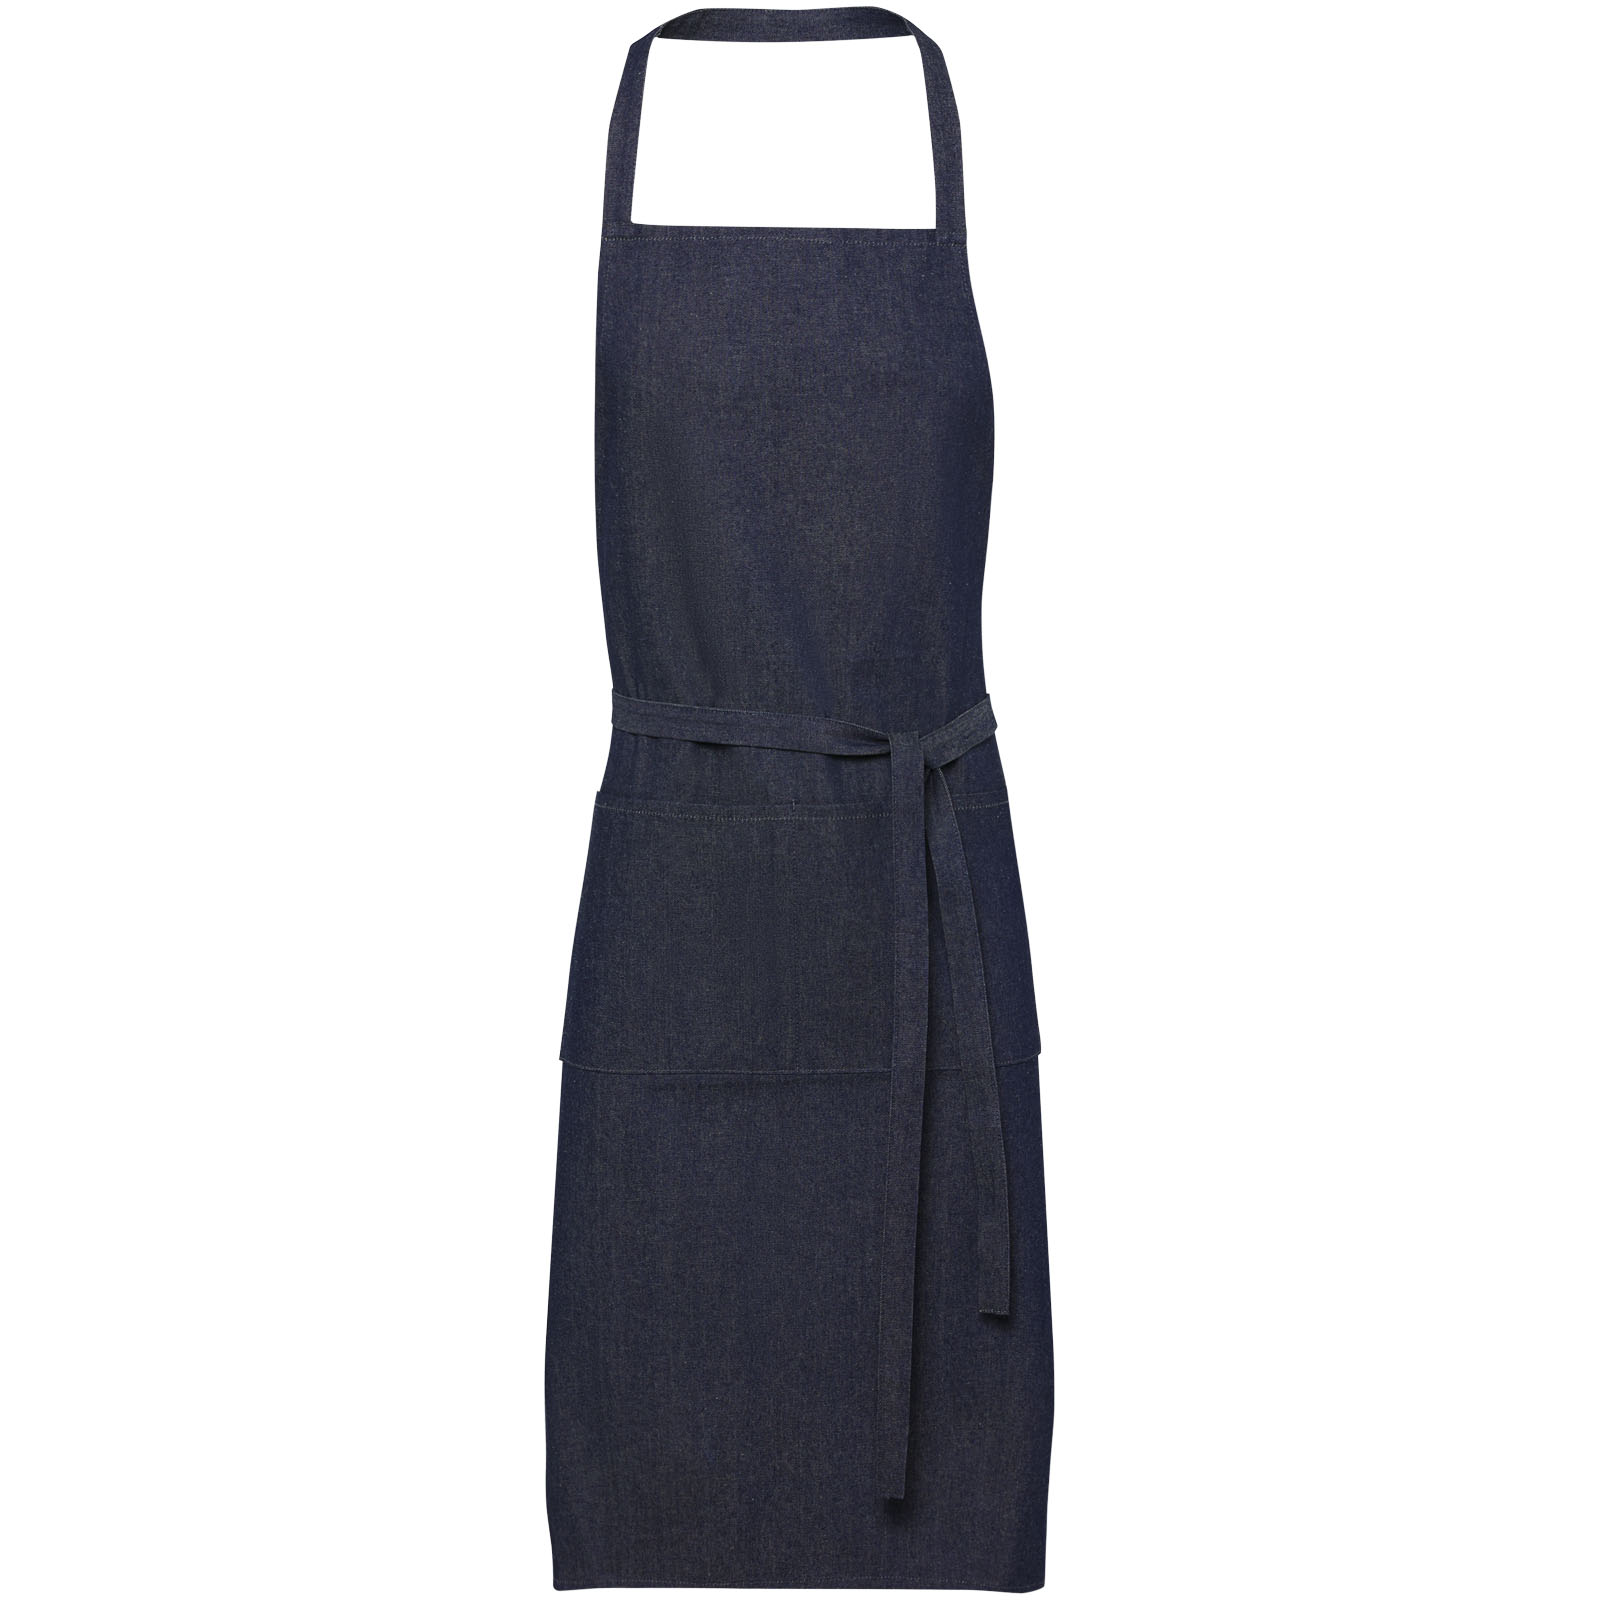 Aprons - Jeen 200 g/m² recycled denim apron